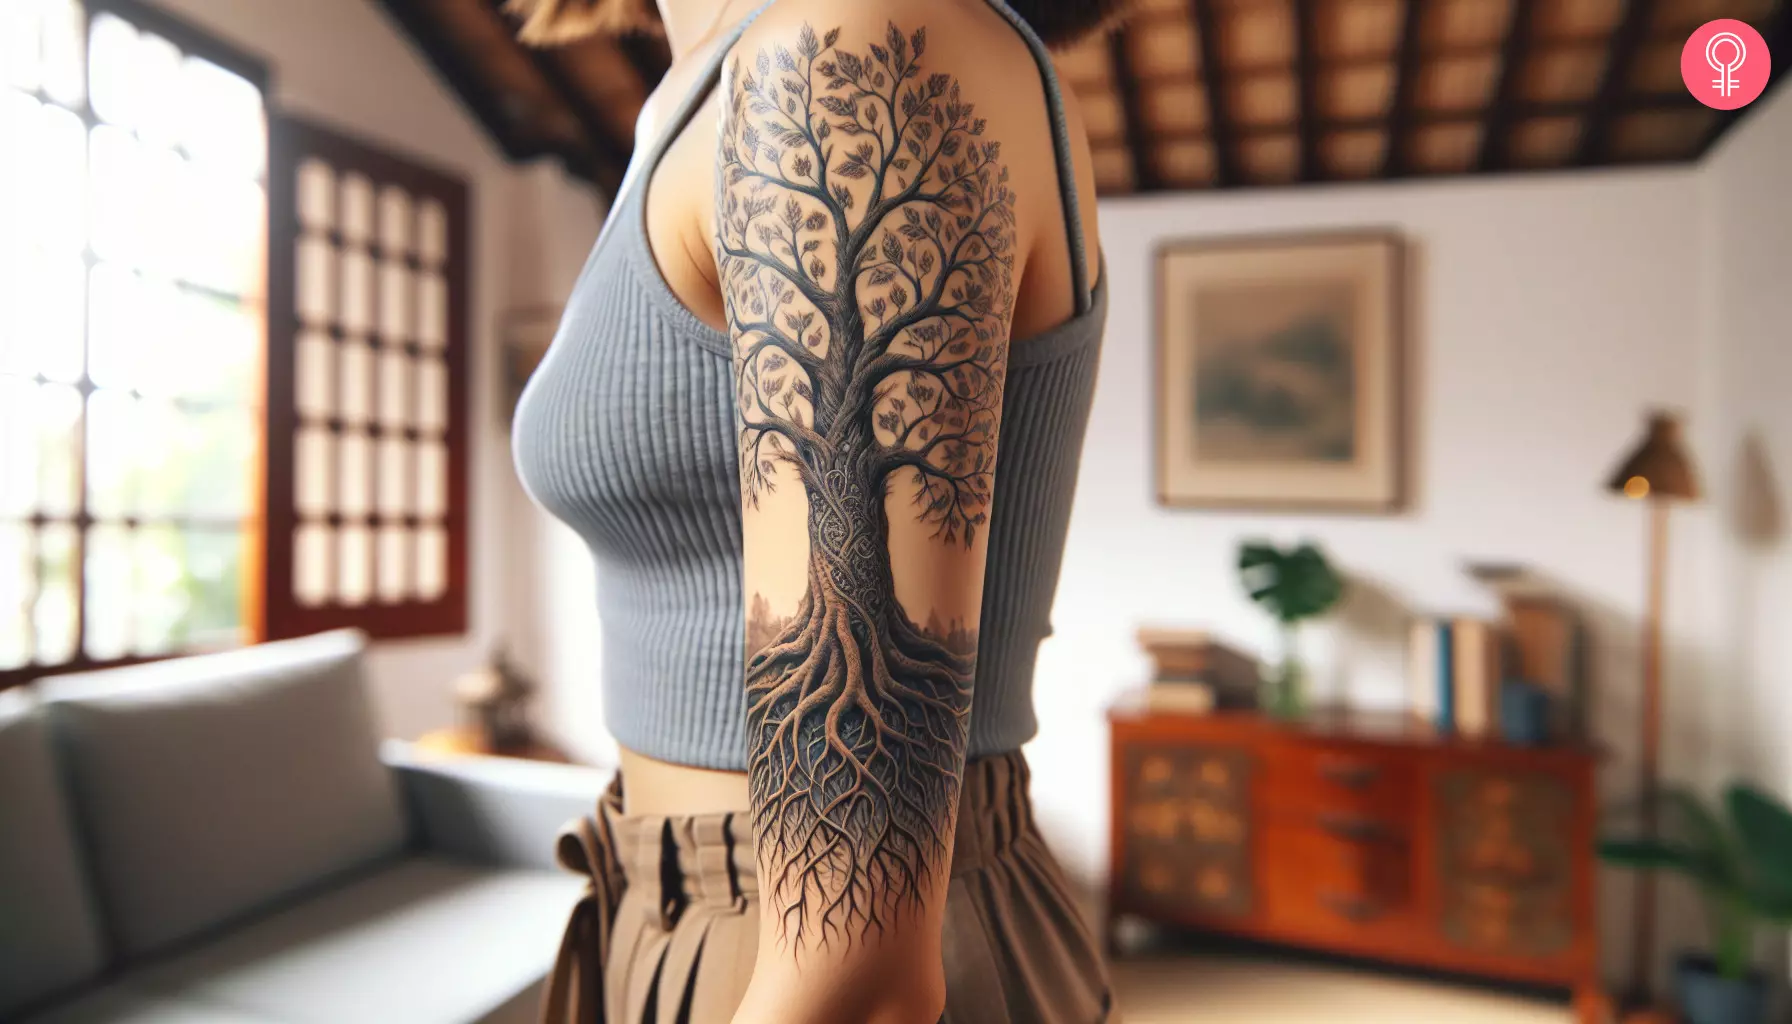 A woman with a realistic tree of life tattoo design on her arm